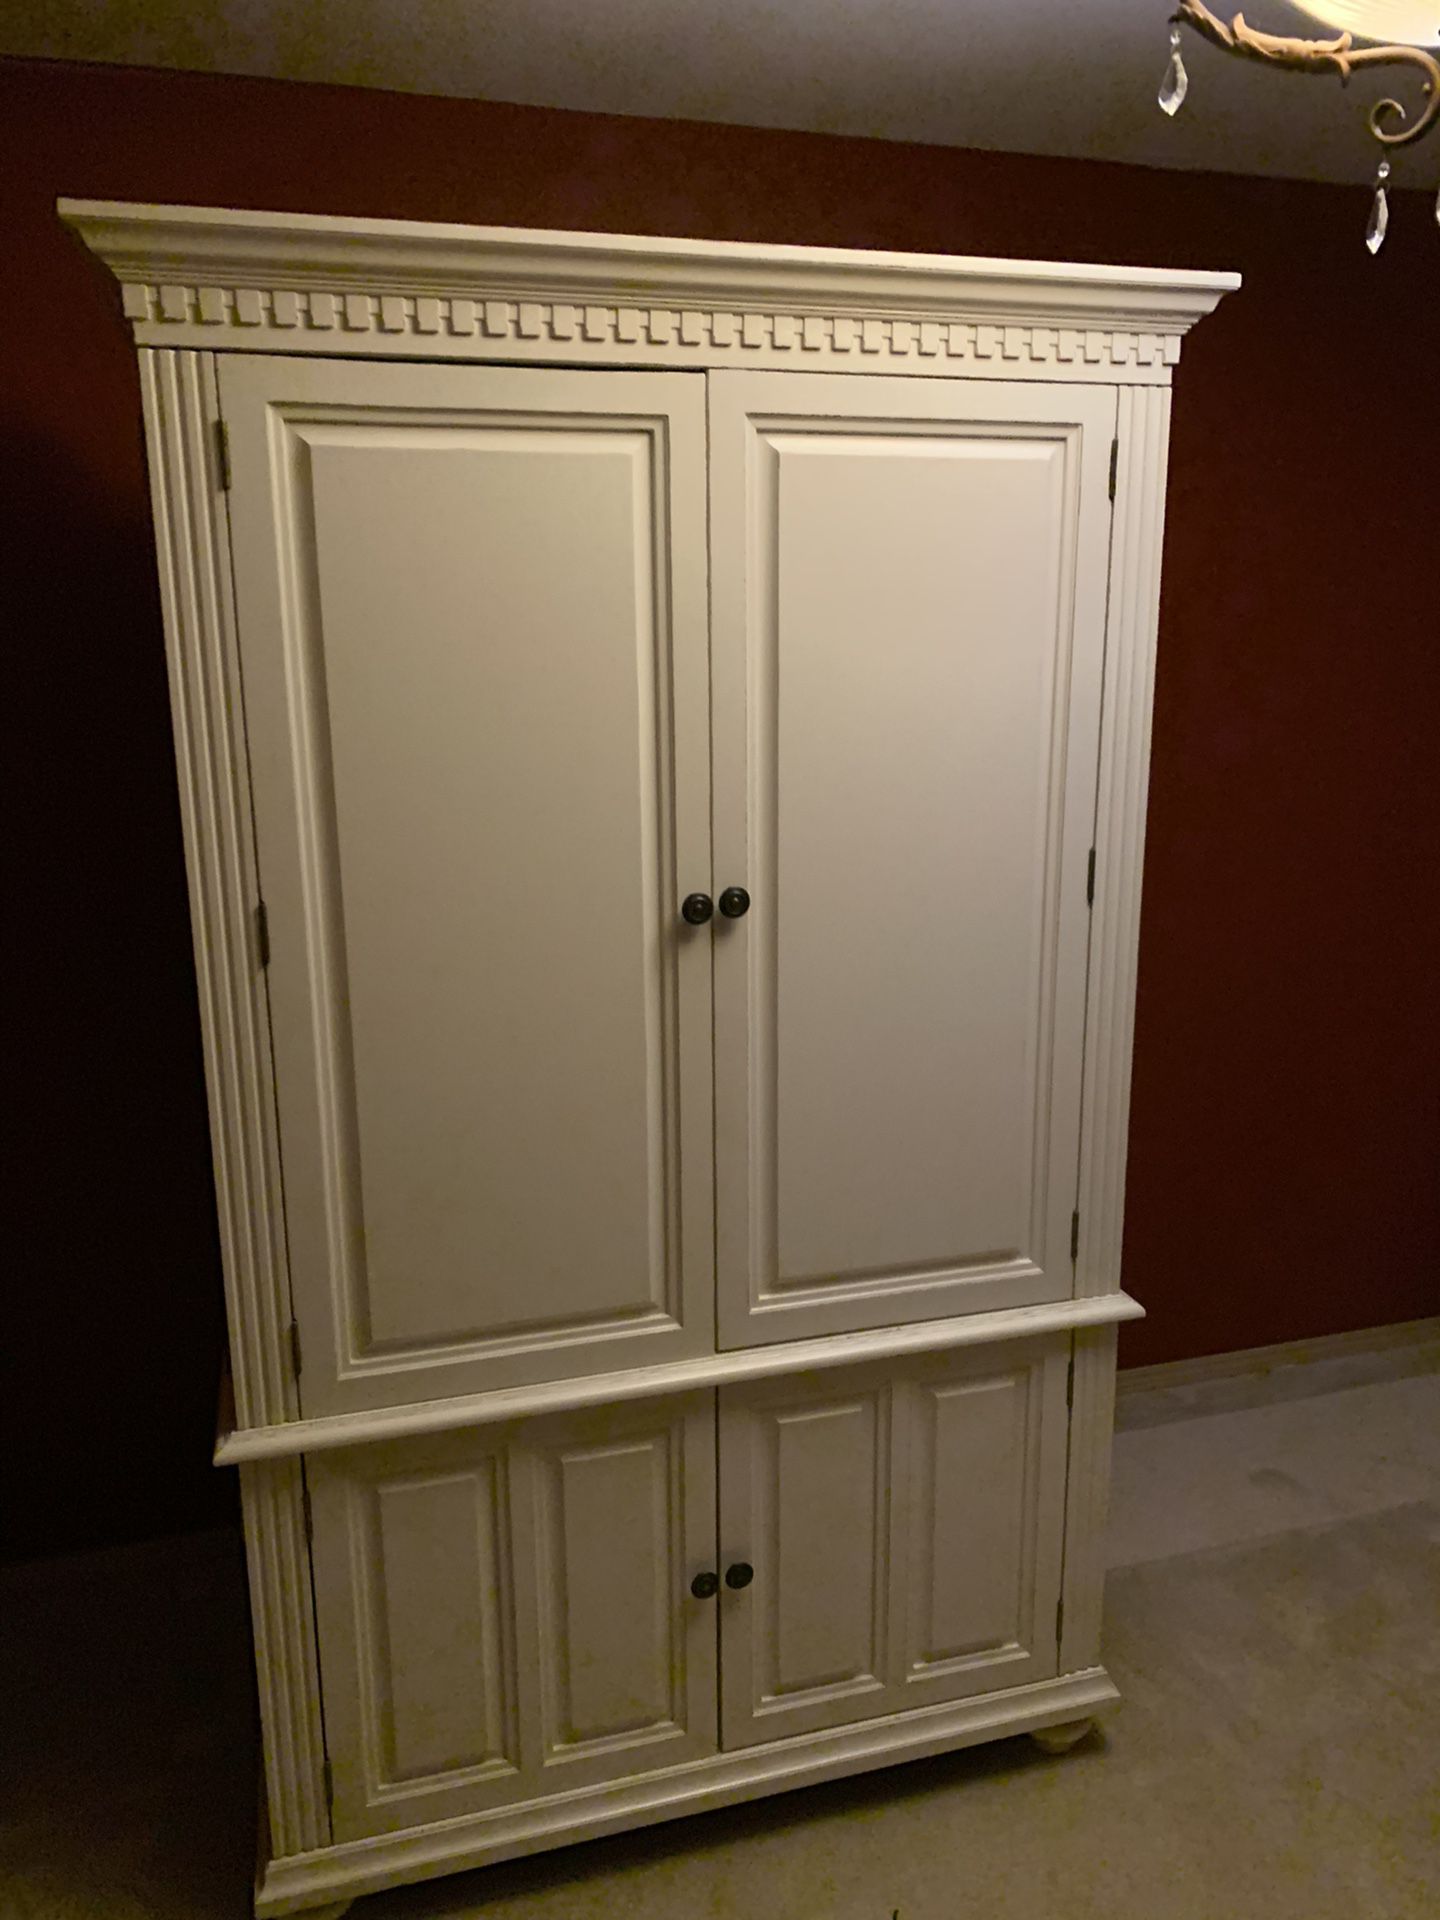 Office armoire